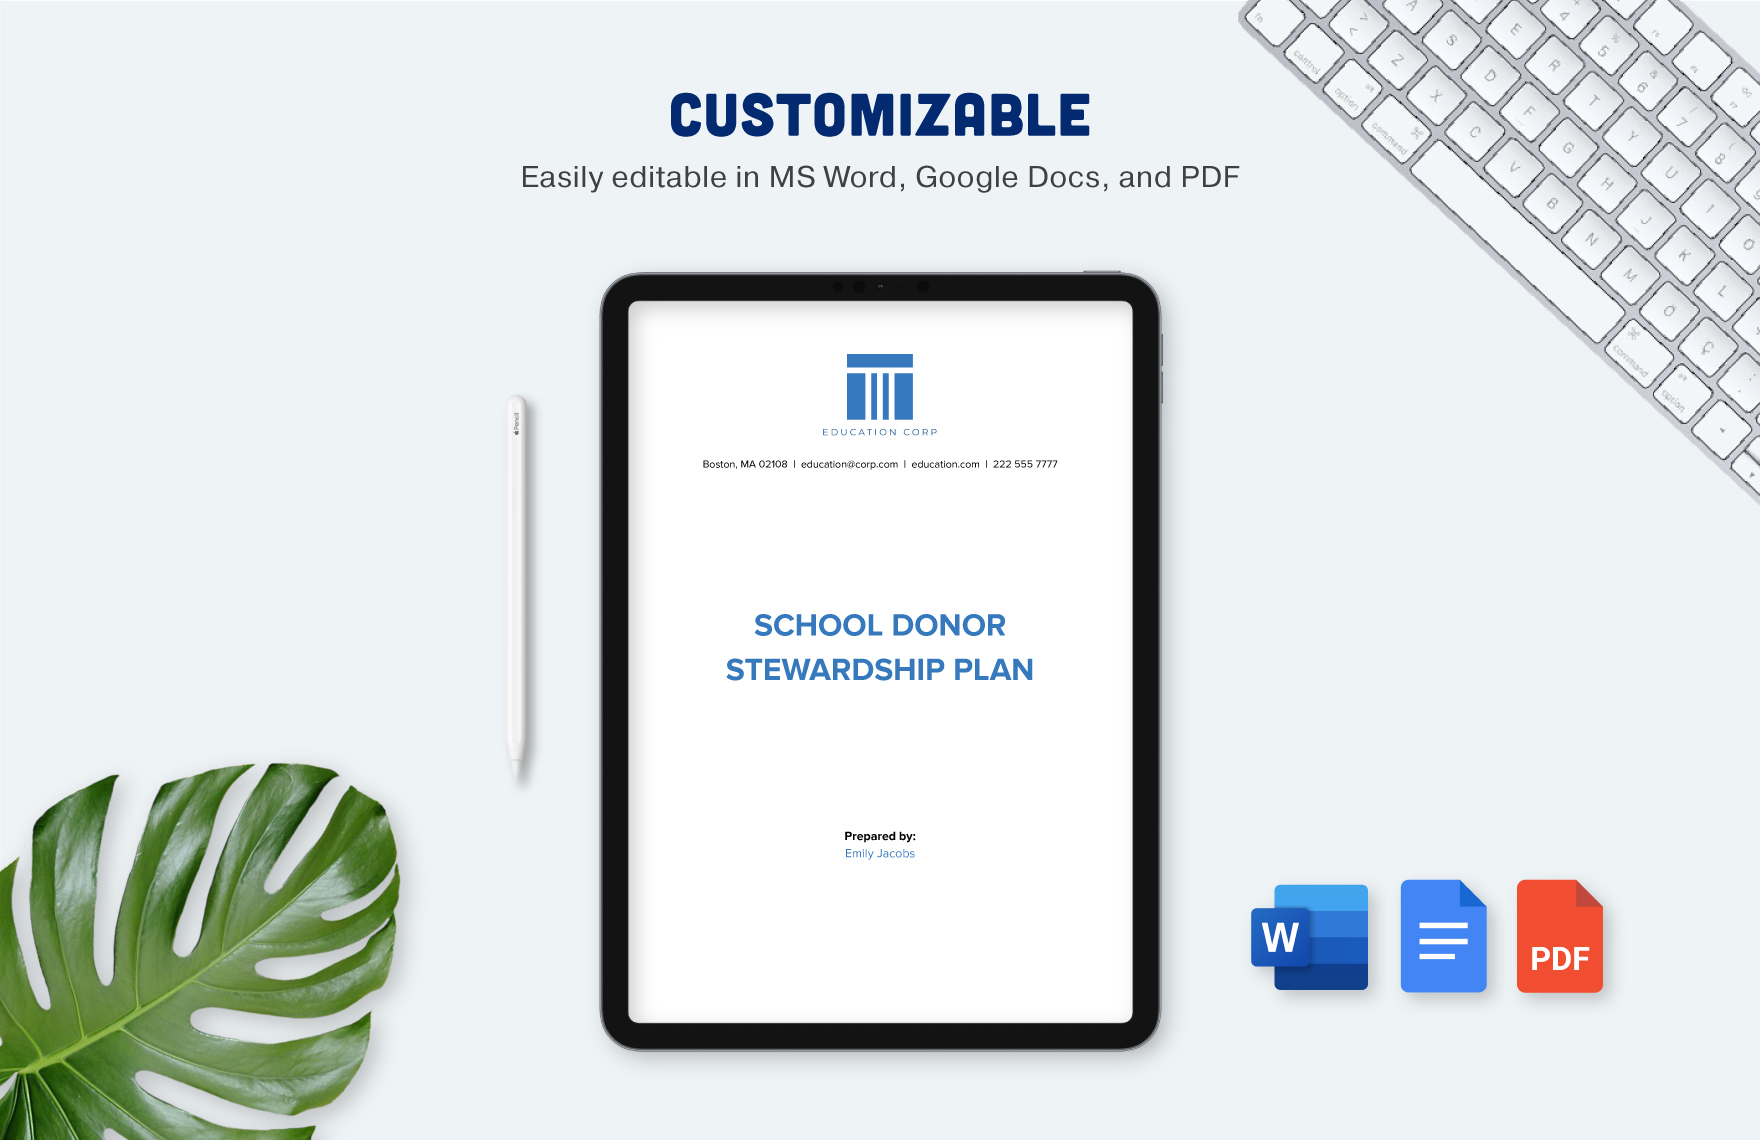 10 Education Fundraising and Donor Relation Template Bundle